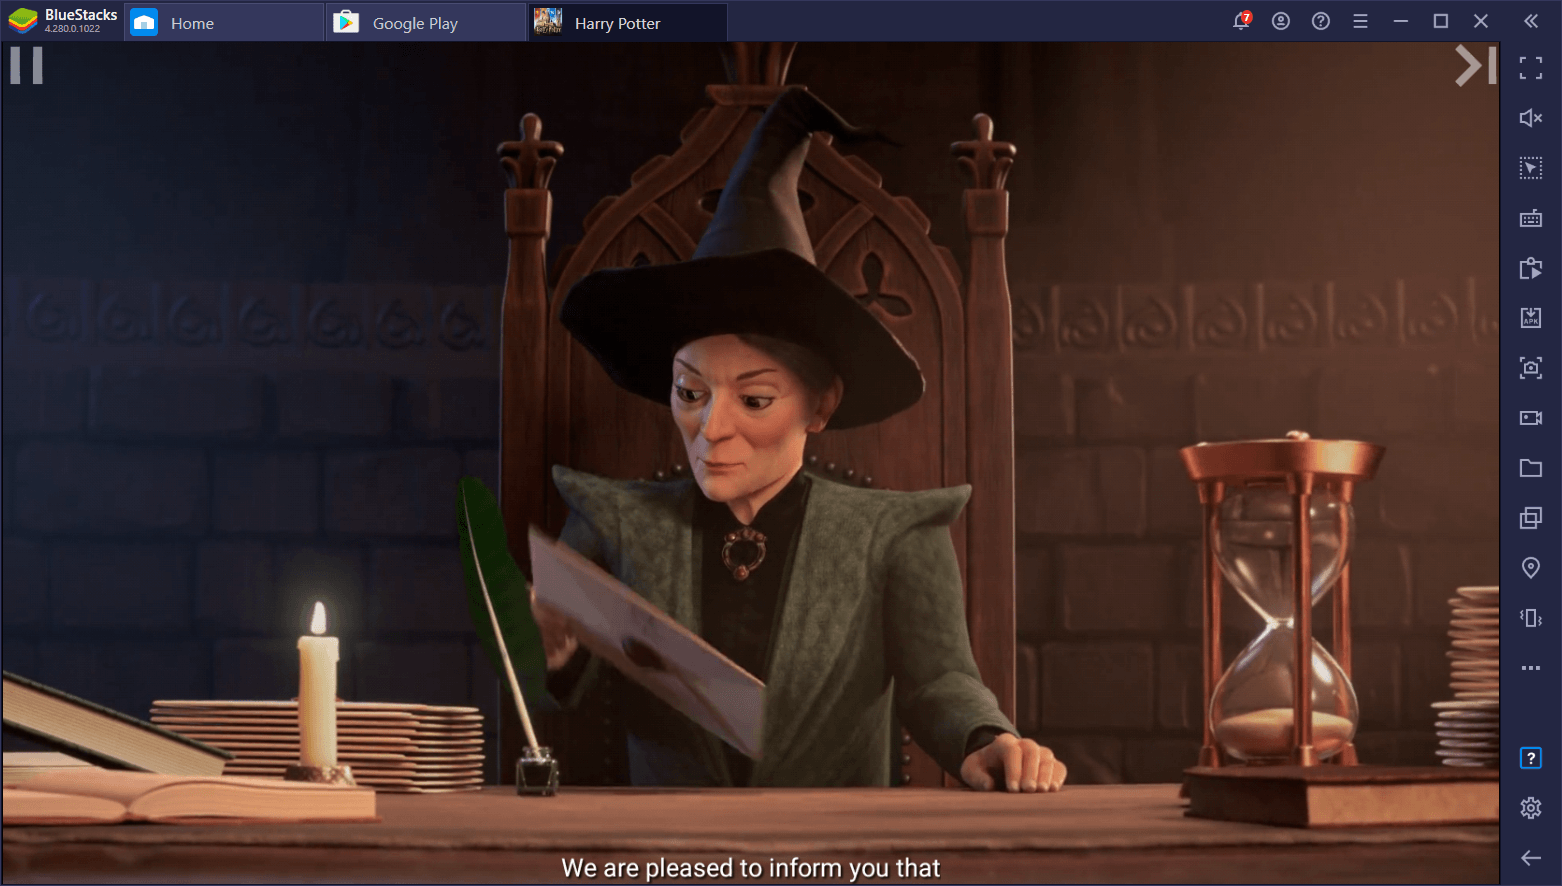 Harry Potter: Hogwarts Mystery on PC - How to Install and Play this Mobile Adventure Game